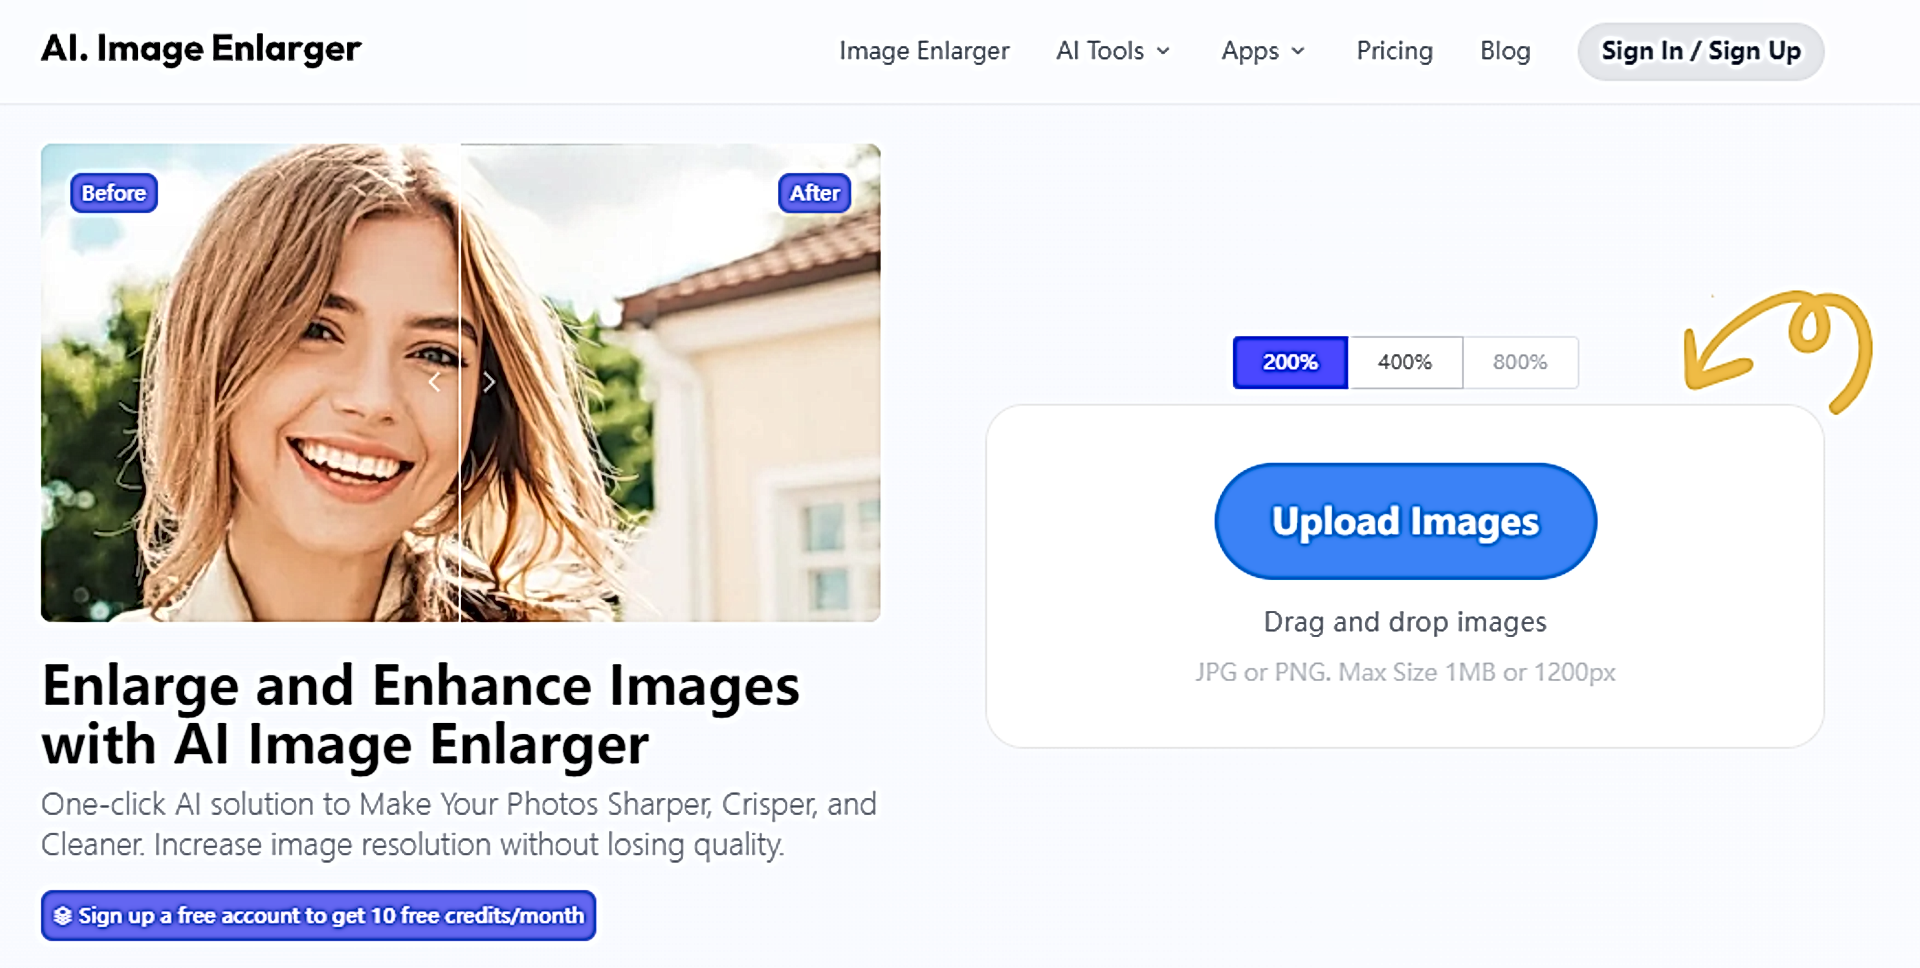 AI Image Enlarger featured